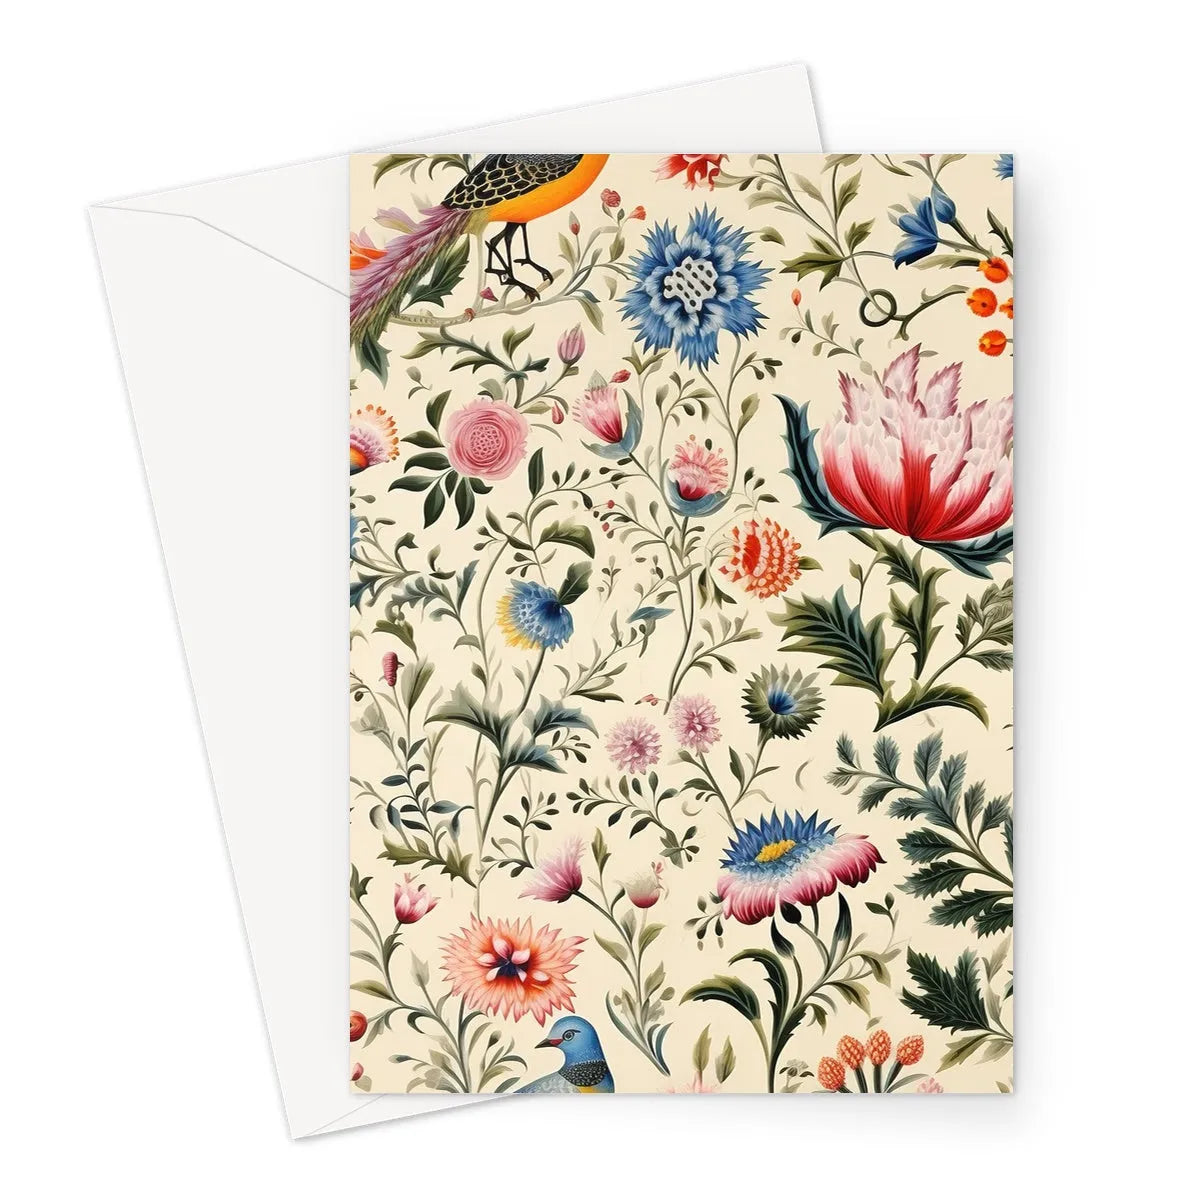 Wildflower Hoopla Greeting Card - A5 Portrait / 1 Card - Greeting & Note Cards - Aesthetic Art